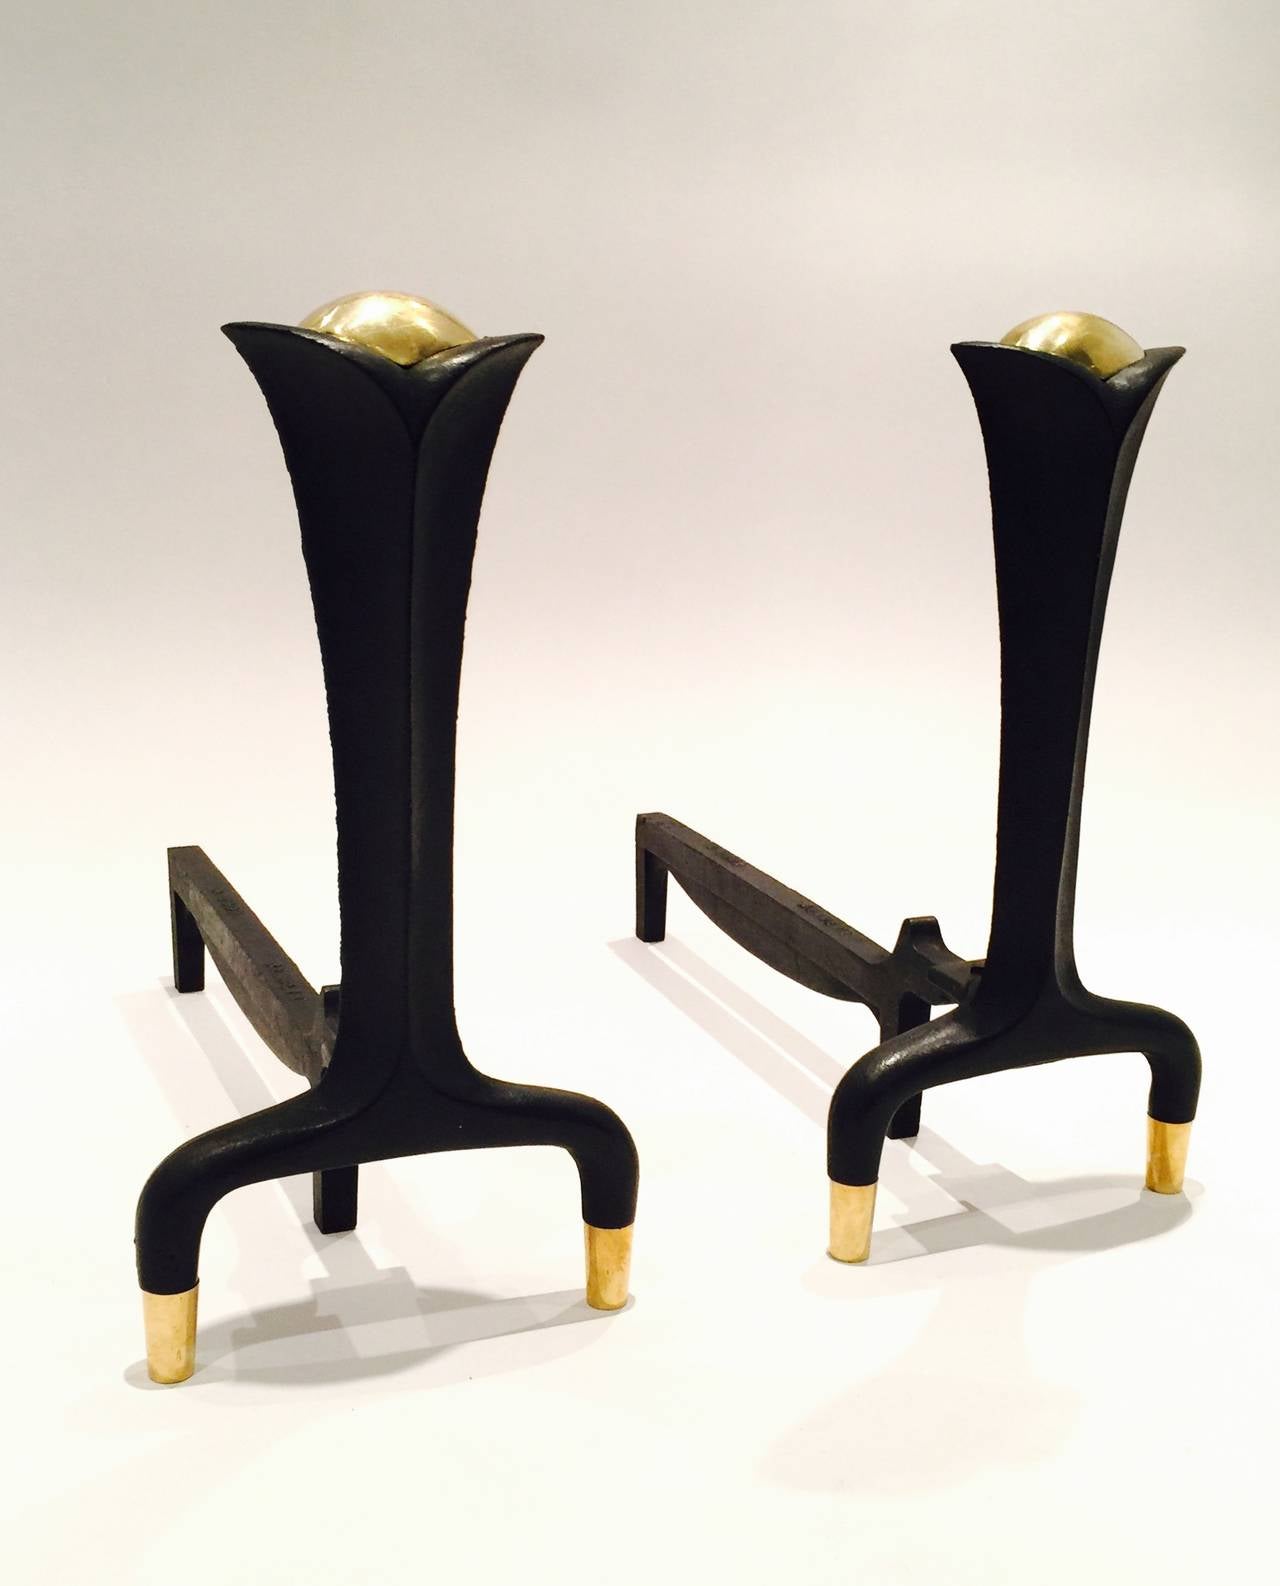 Pair Of Iron and Brass Andirons Designed By Donald Deskey For Bennett